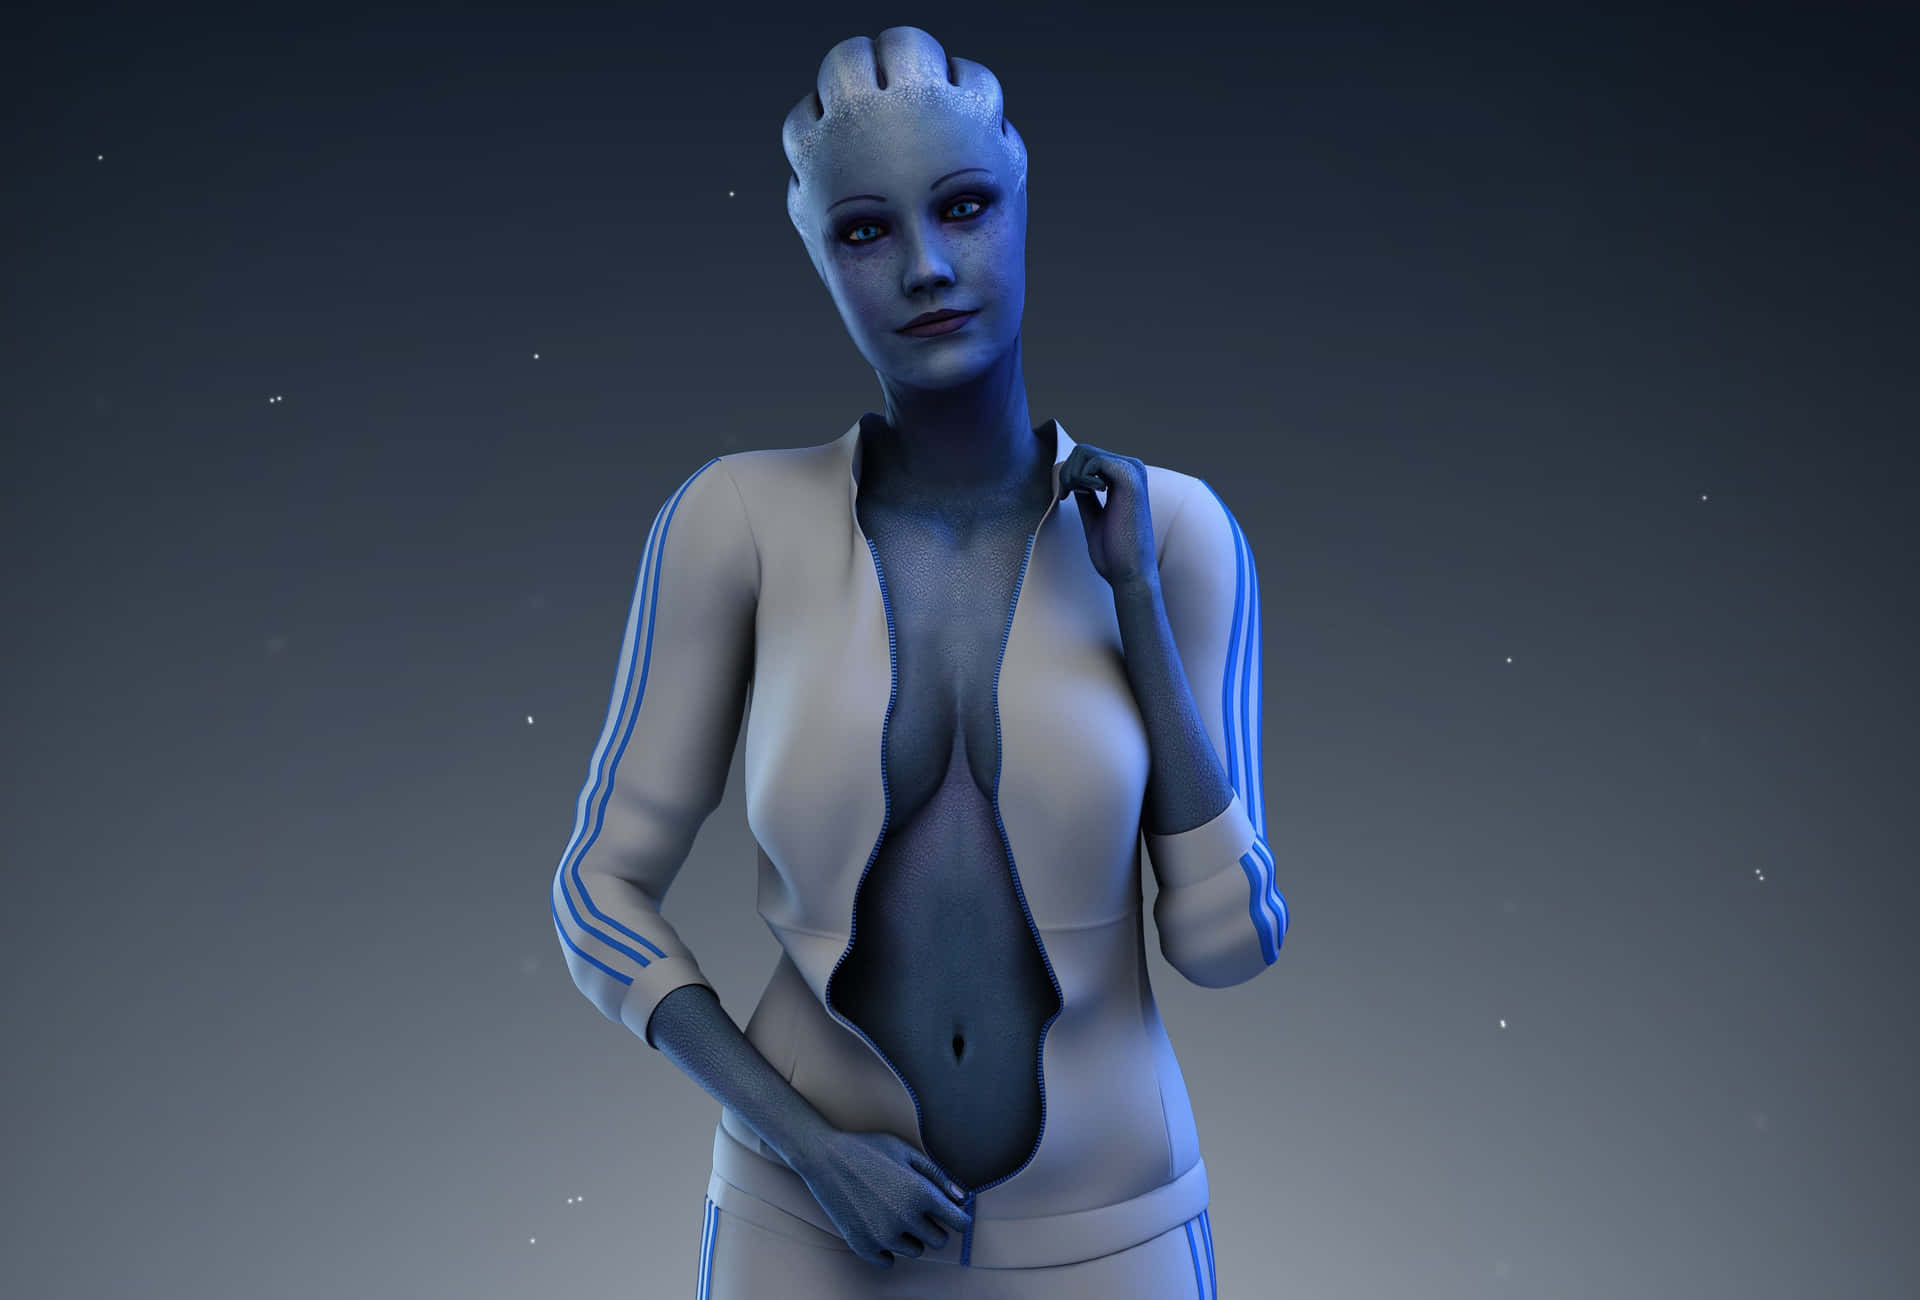 Liara T'soni striking a powerful pose in the Mass Effect universe. Wallpaper